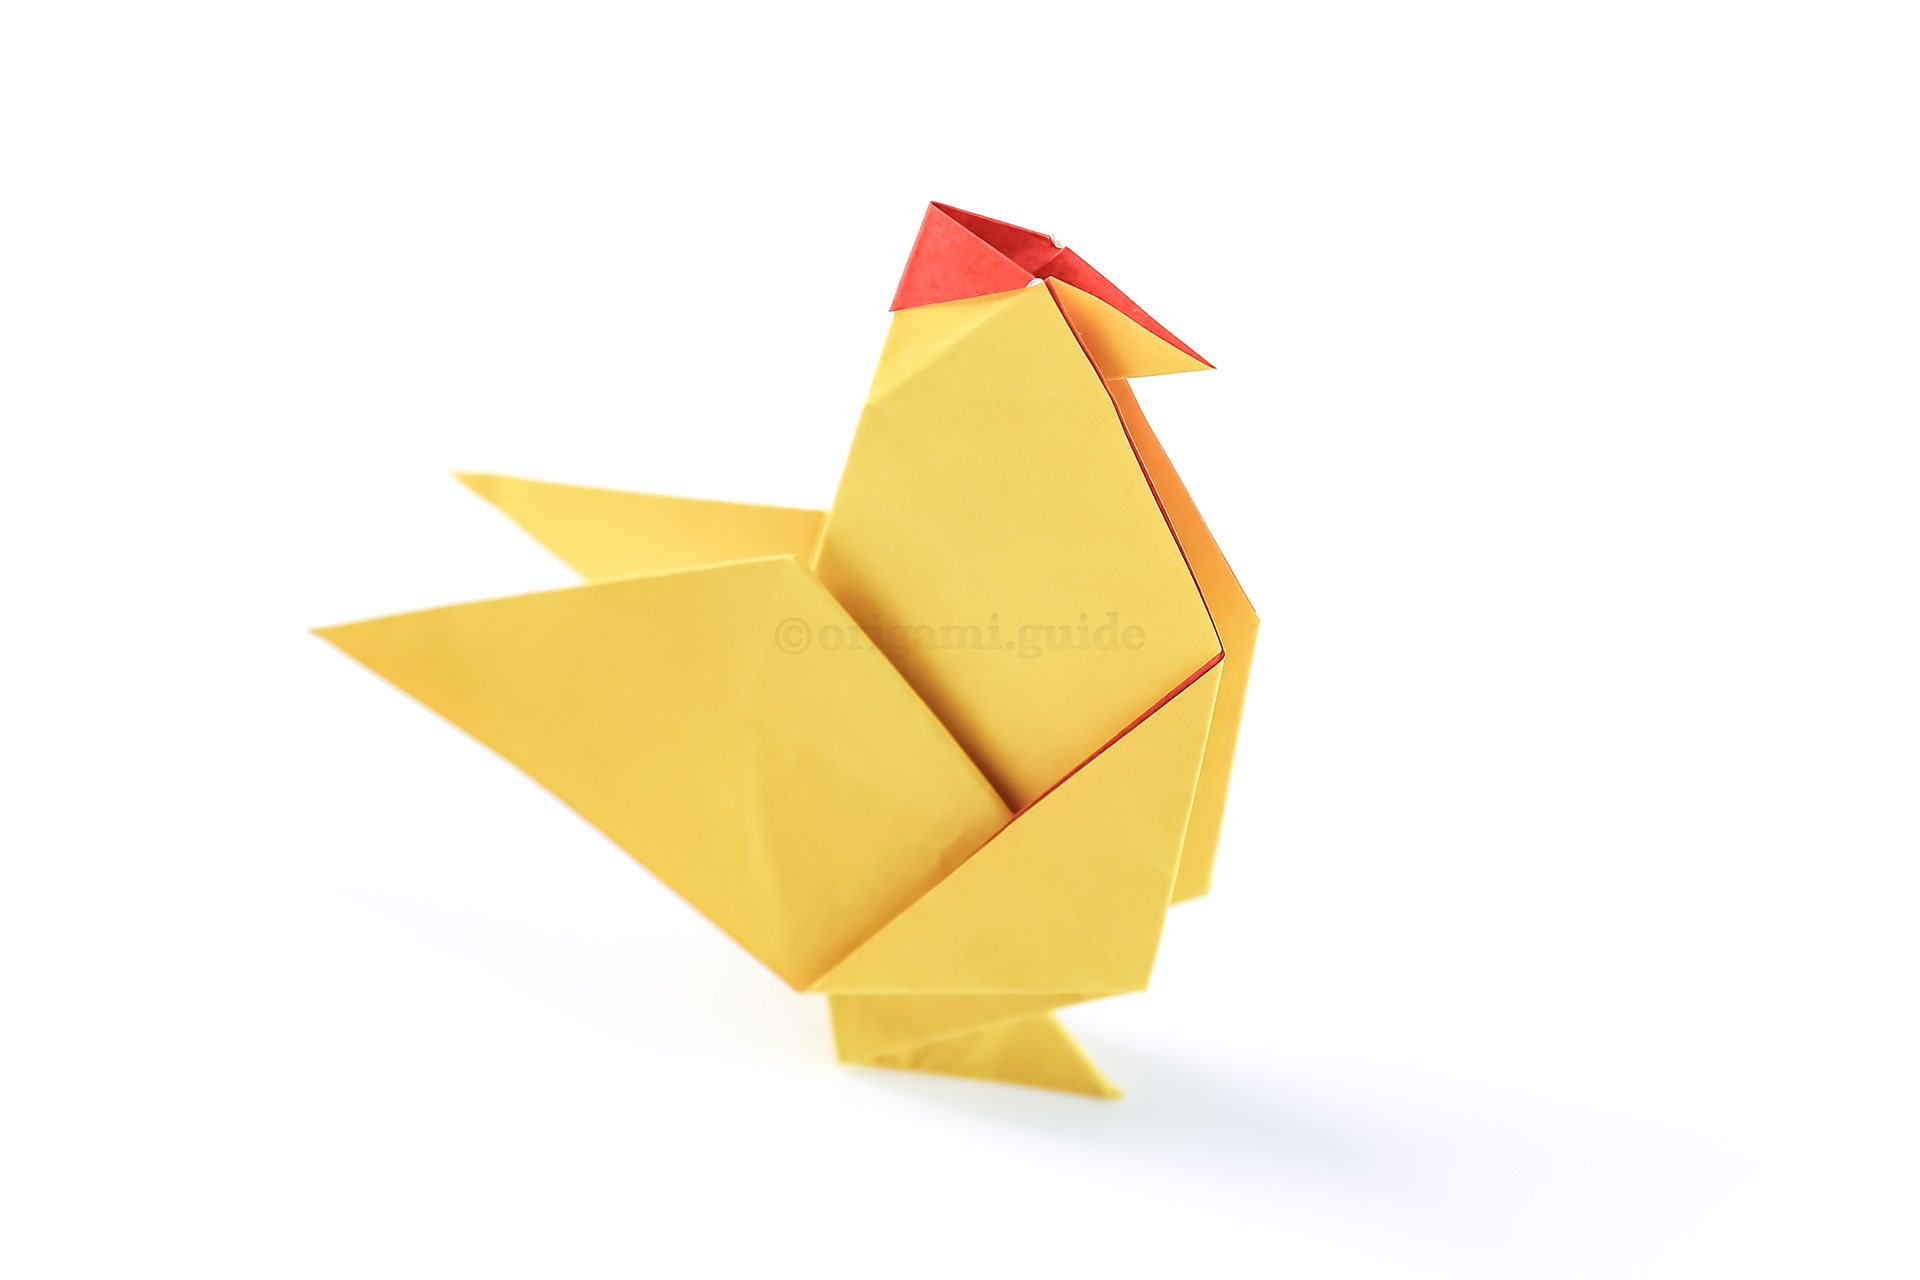 The origami chicken is complete! If your chicken won't stand up, try pulling the leg folds to be more angled and open it's wings a little.